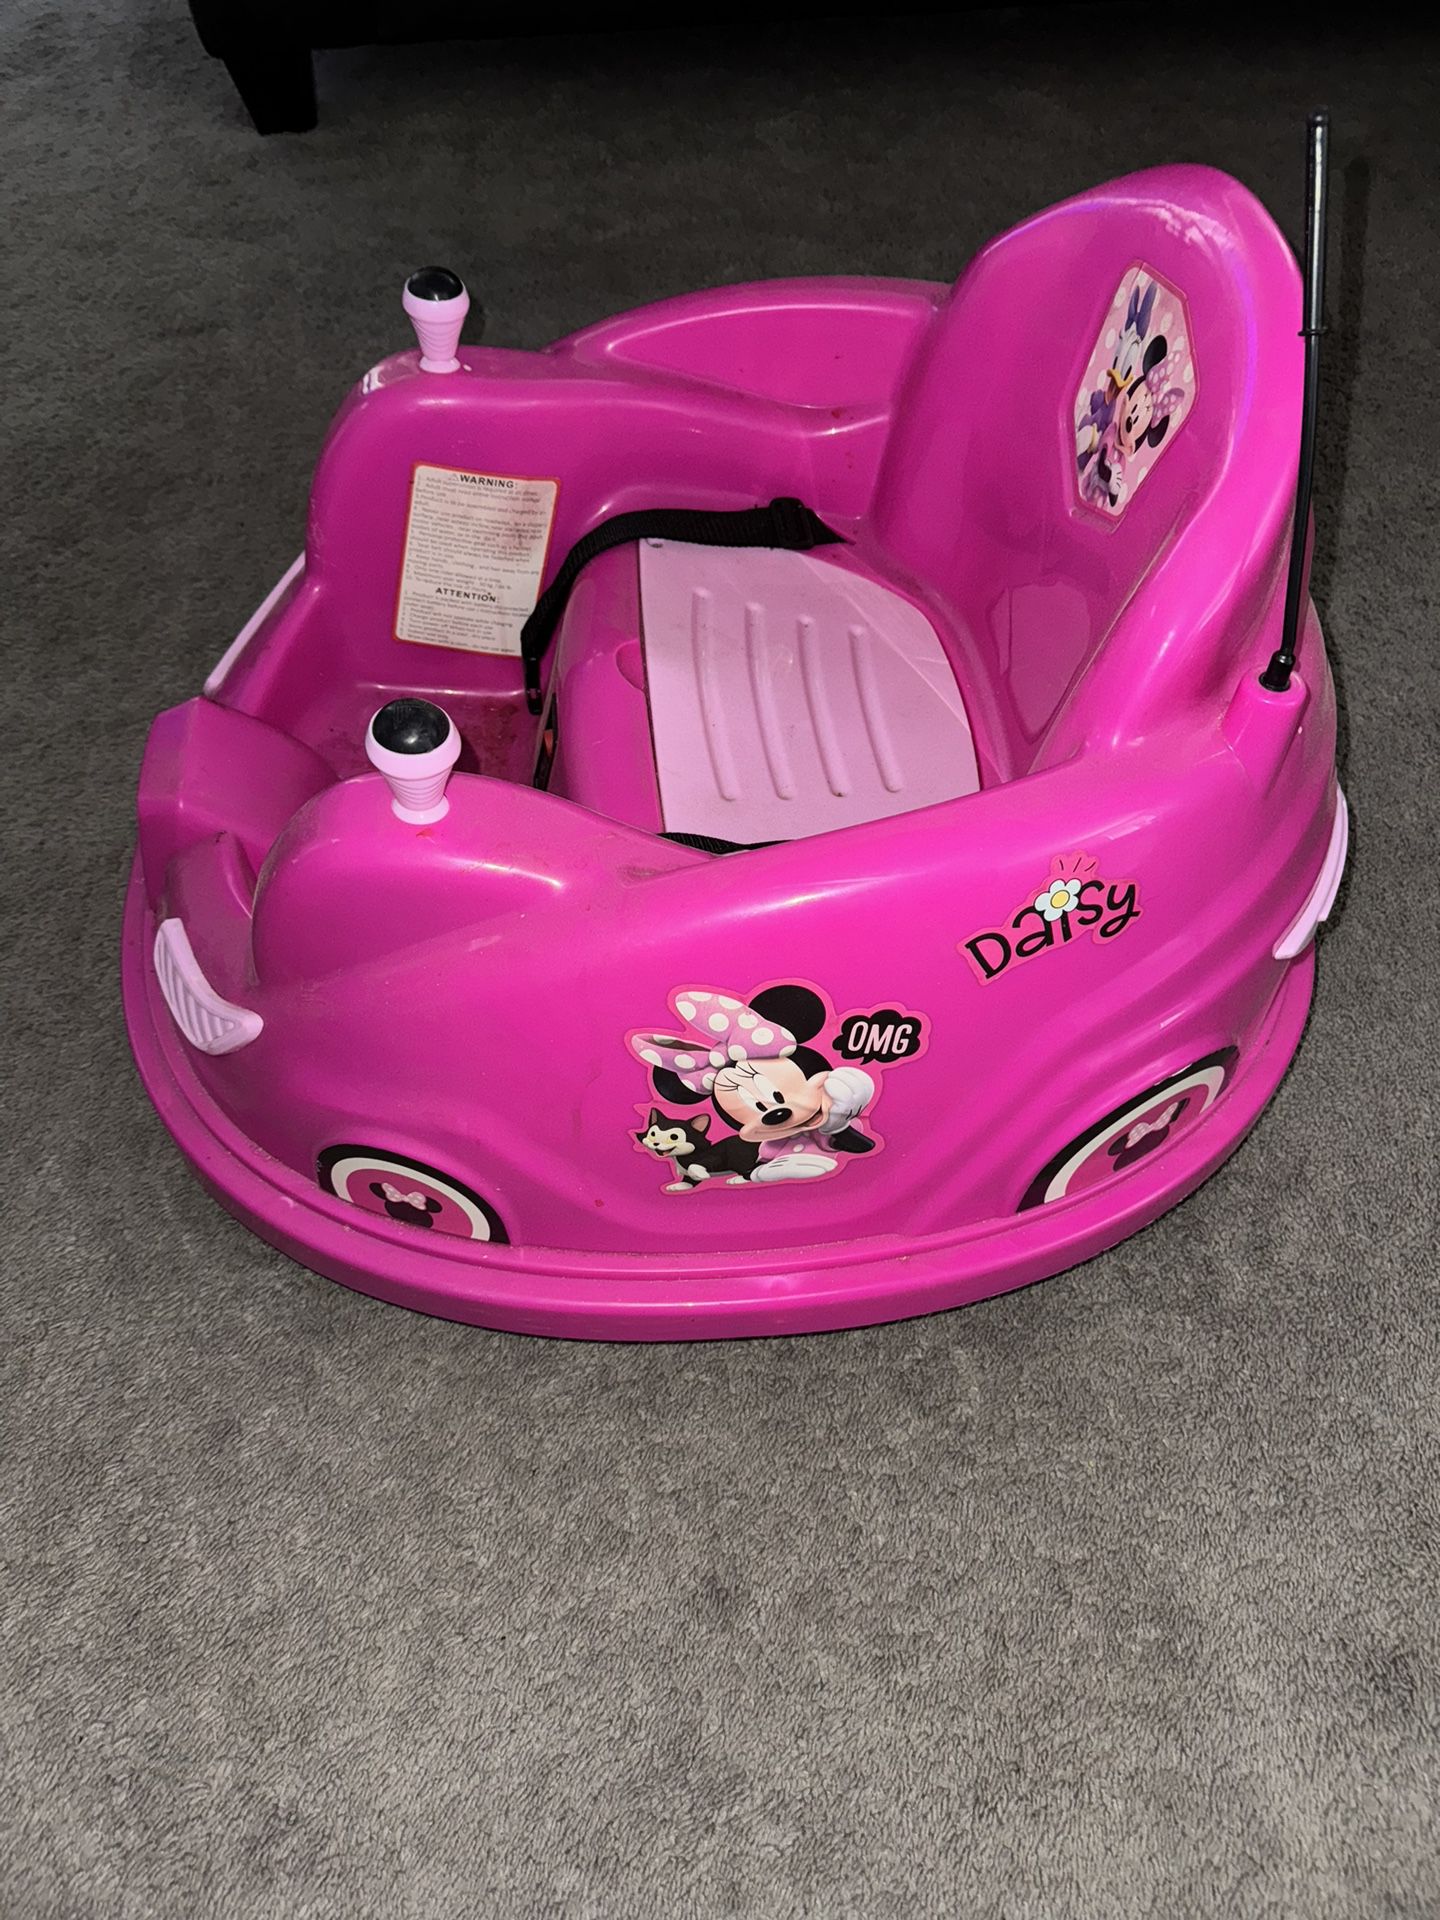 Minnie Mouse Electric Pedal Car